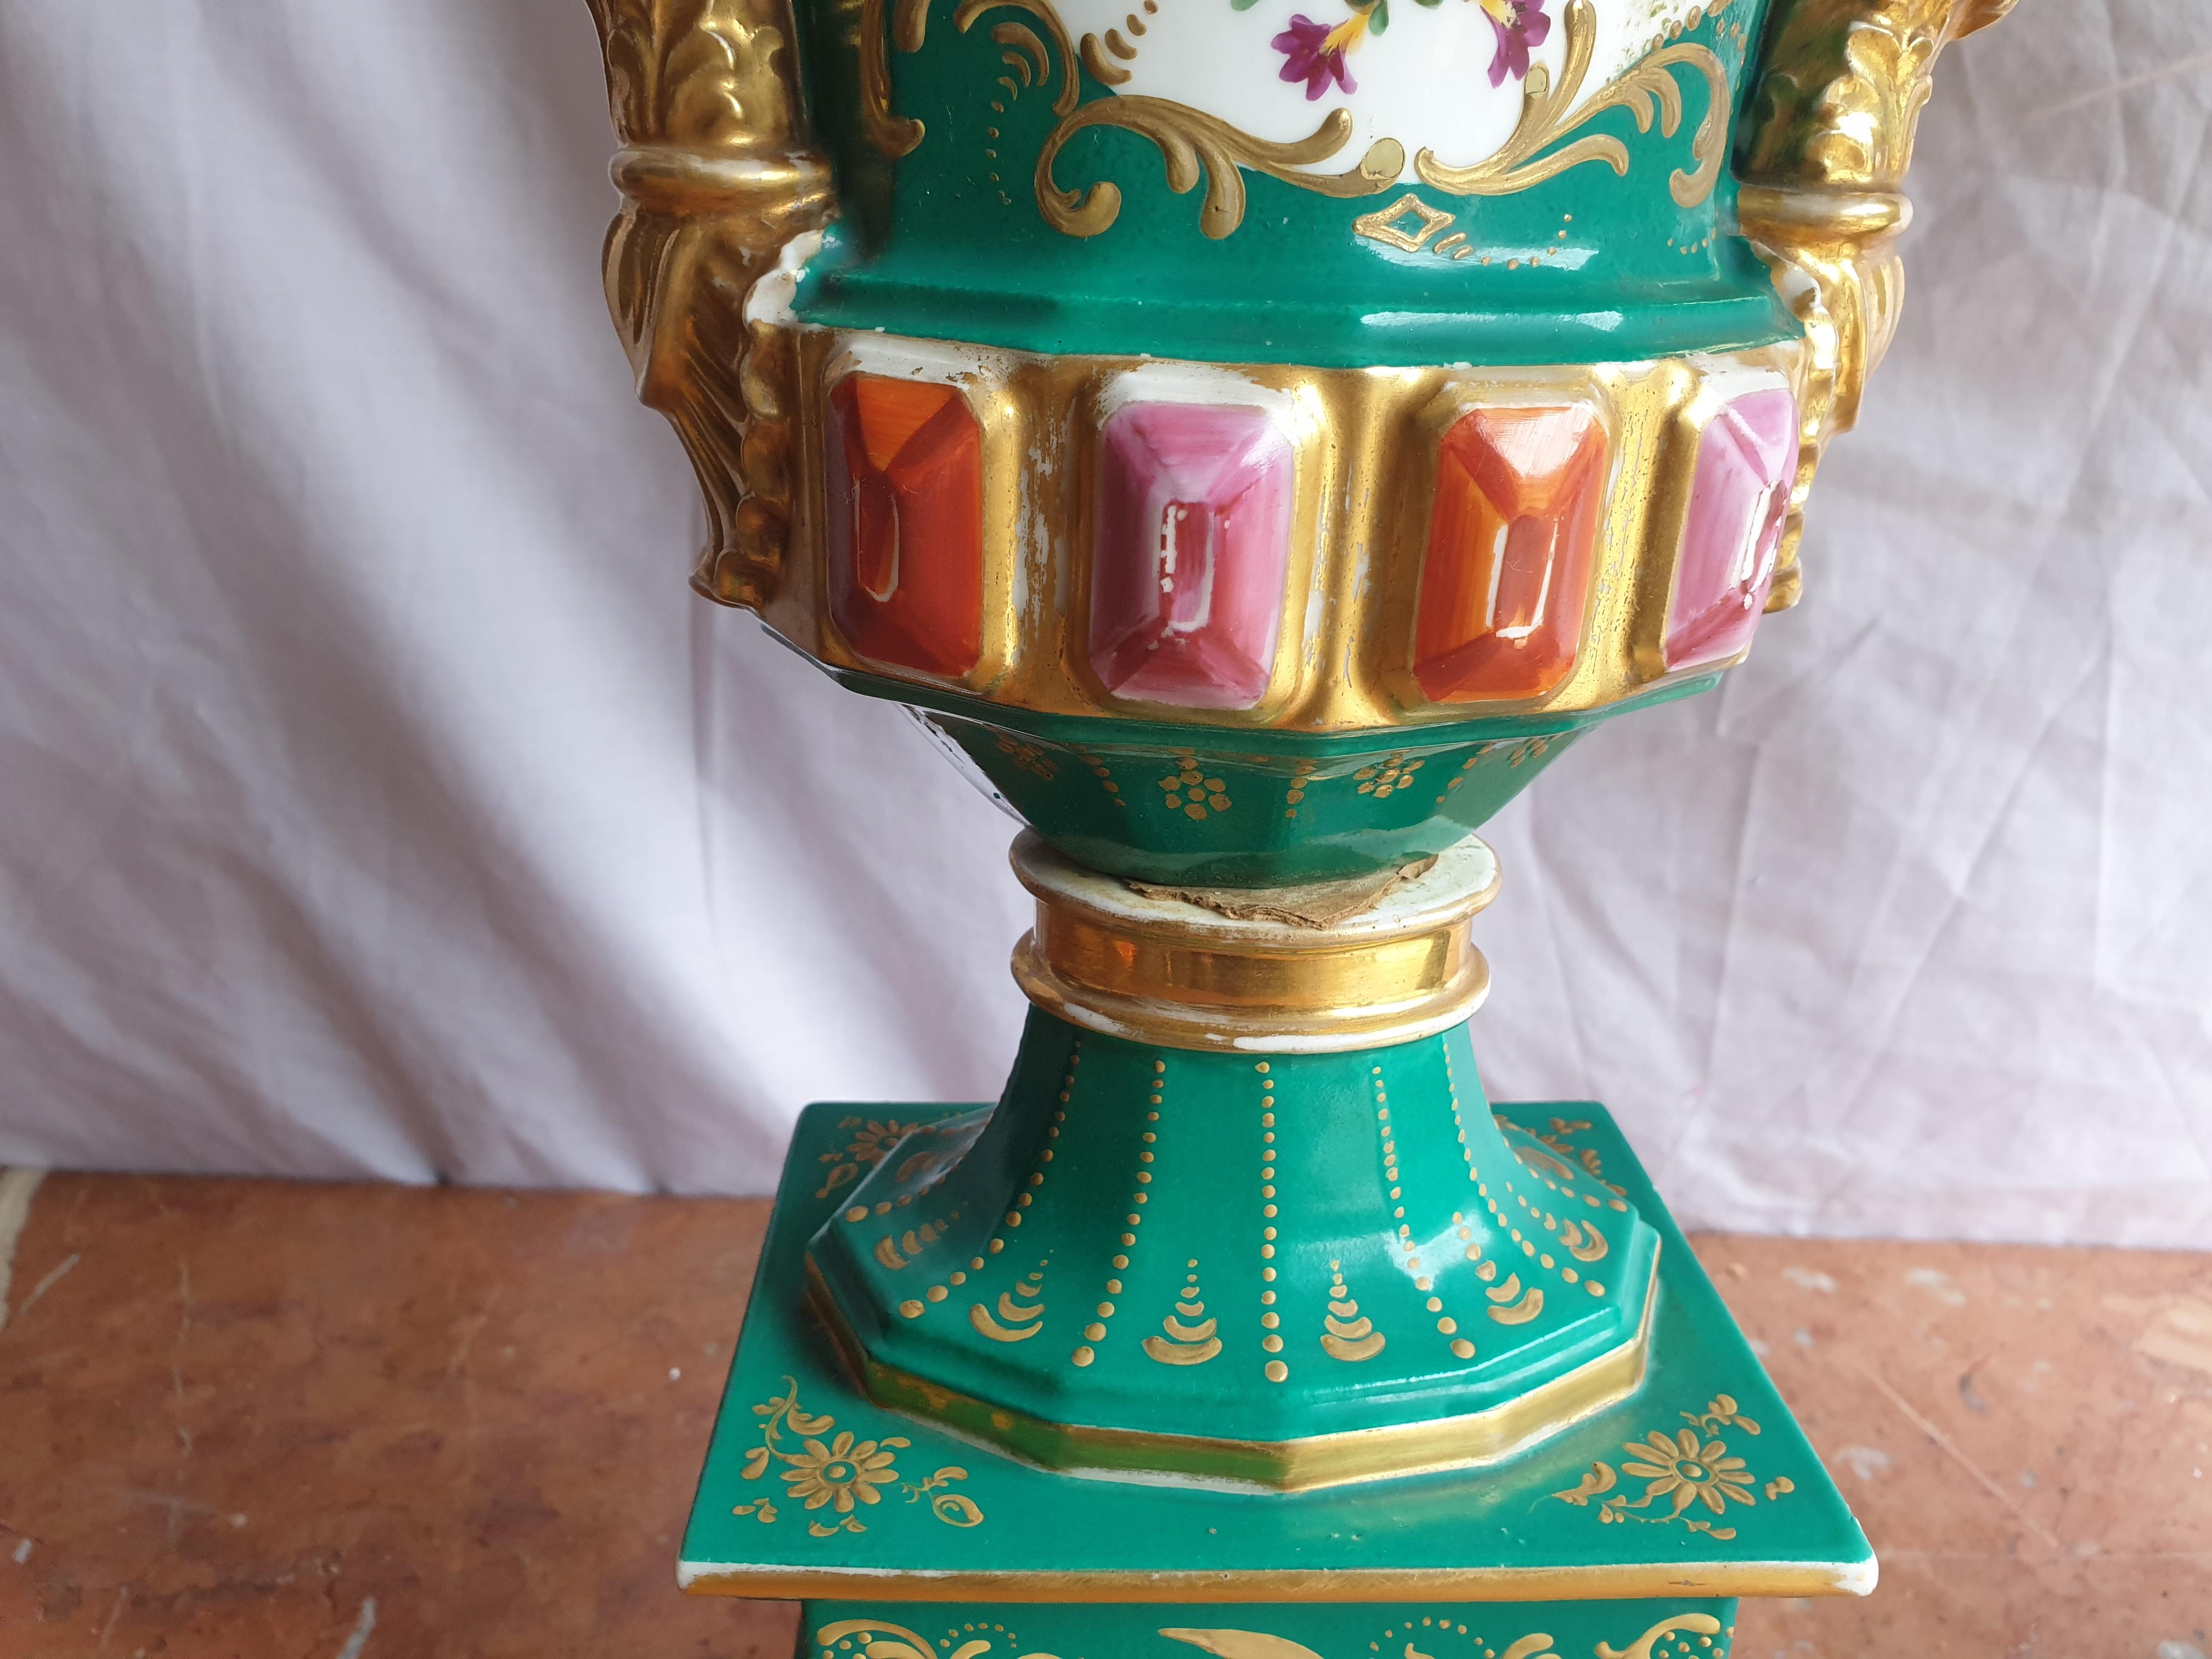 Jacob Petit Hand Painted Urn Vases with Gilding Detailing and Jewelling In Good Condition For Sale In London, GB